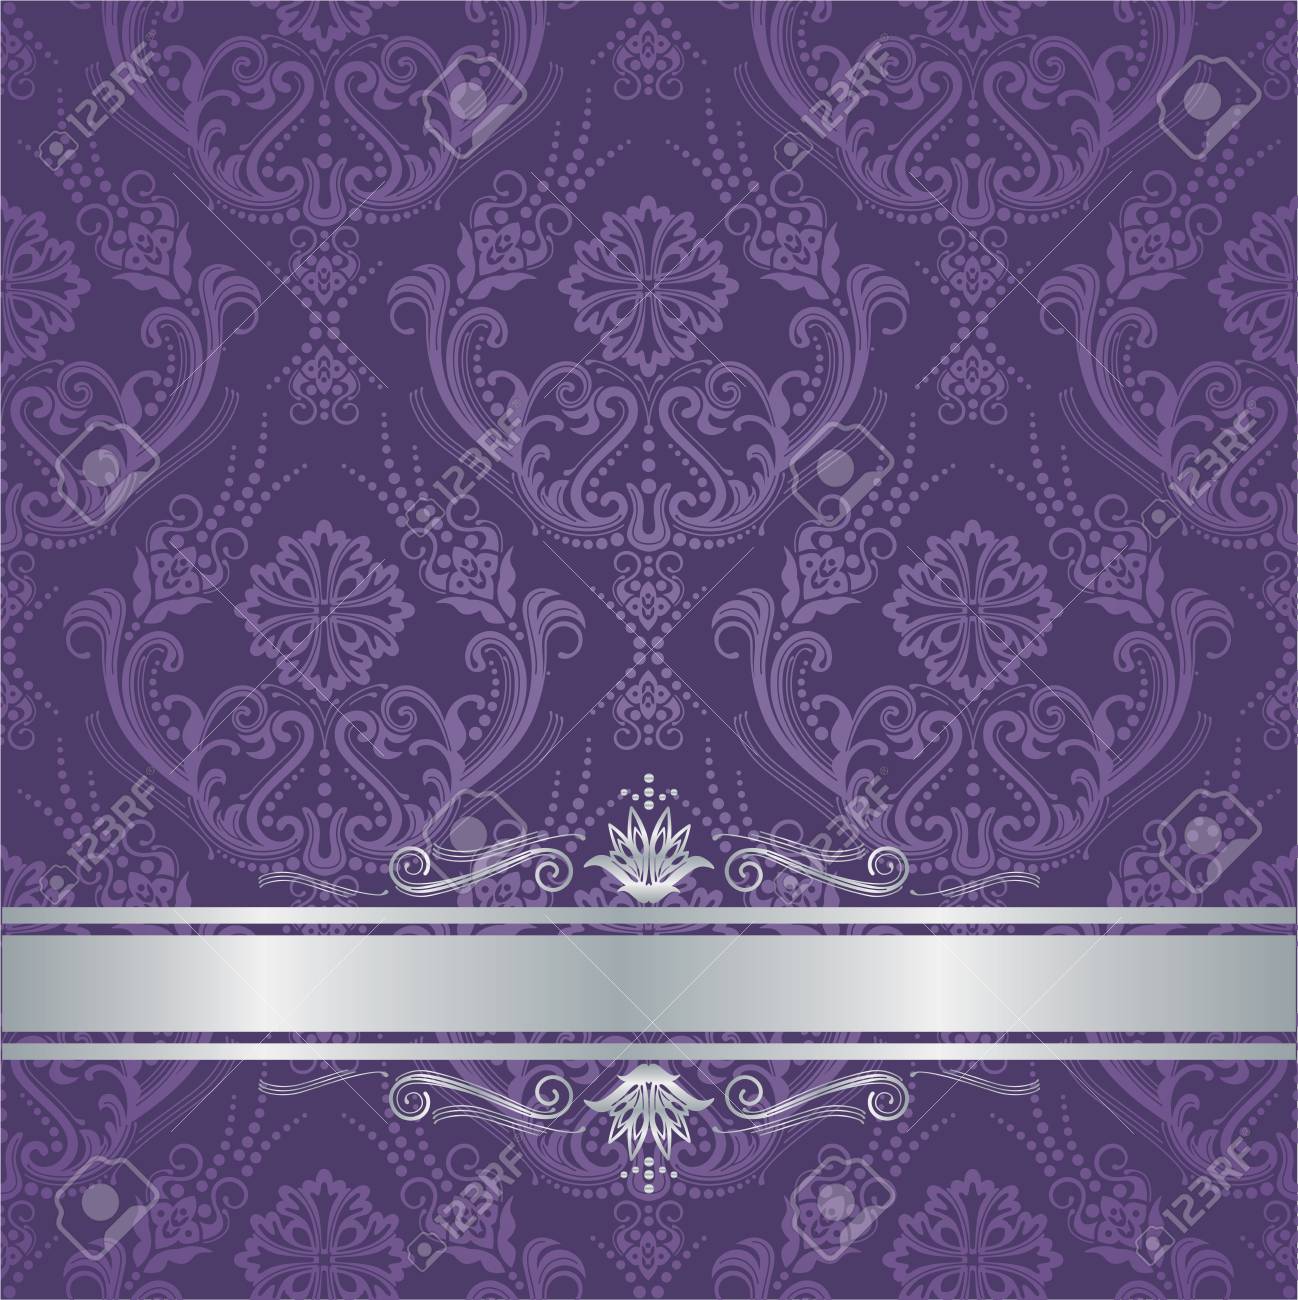 Luxury Purple Victorian Style Floral Damask Wallpaper Cover With